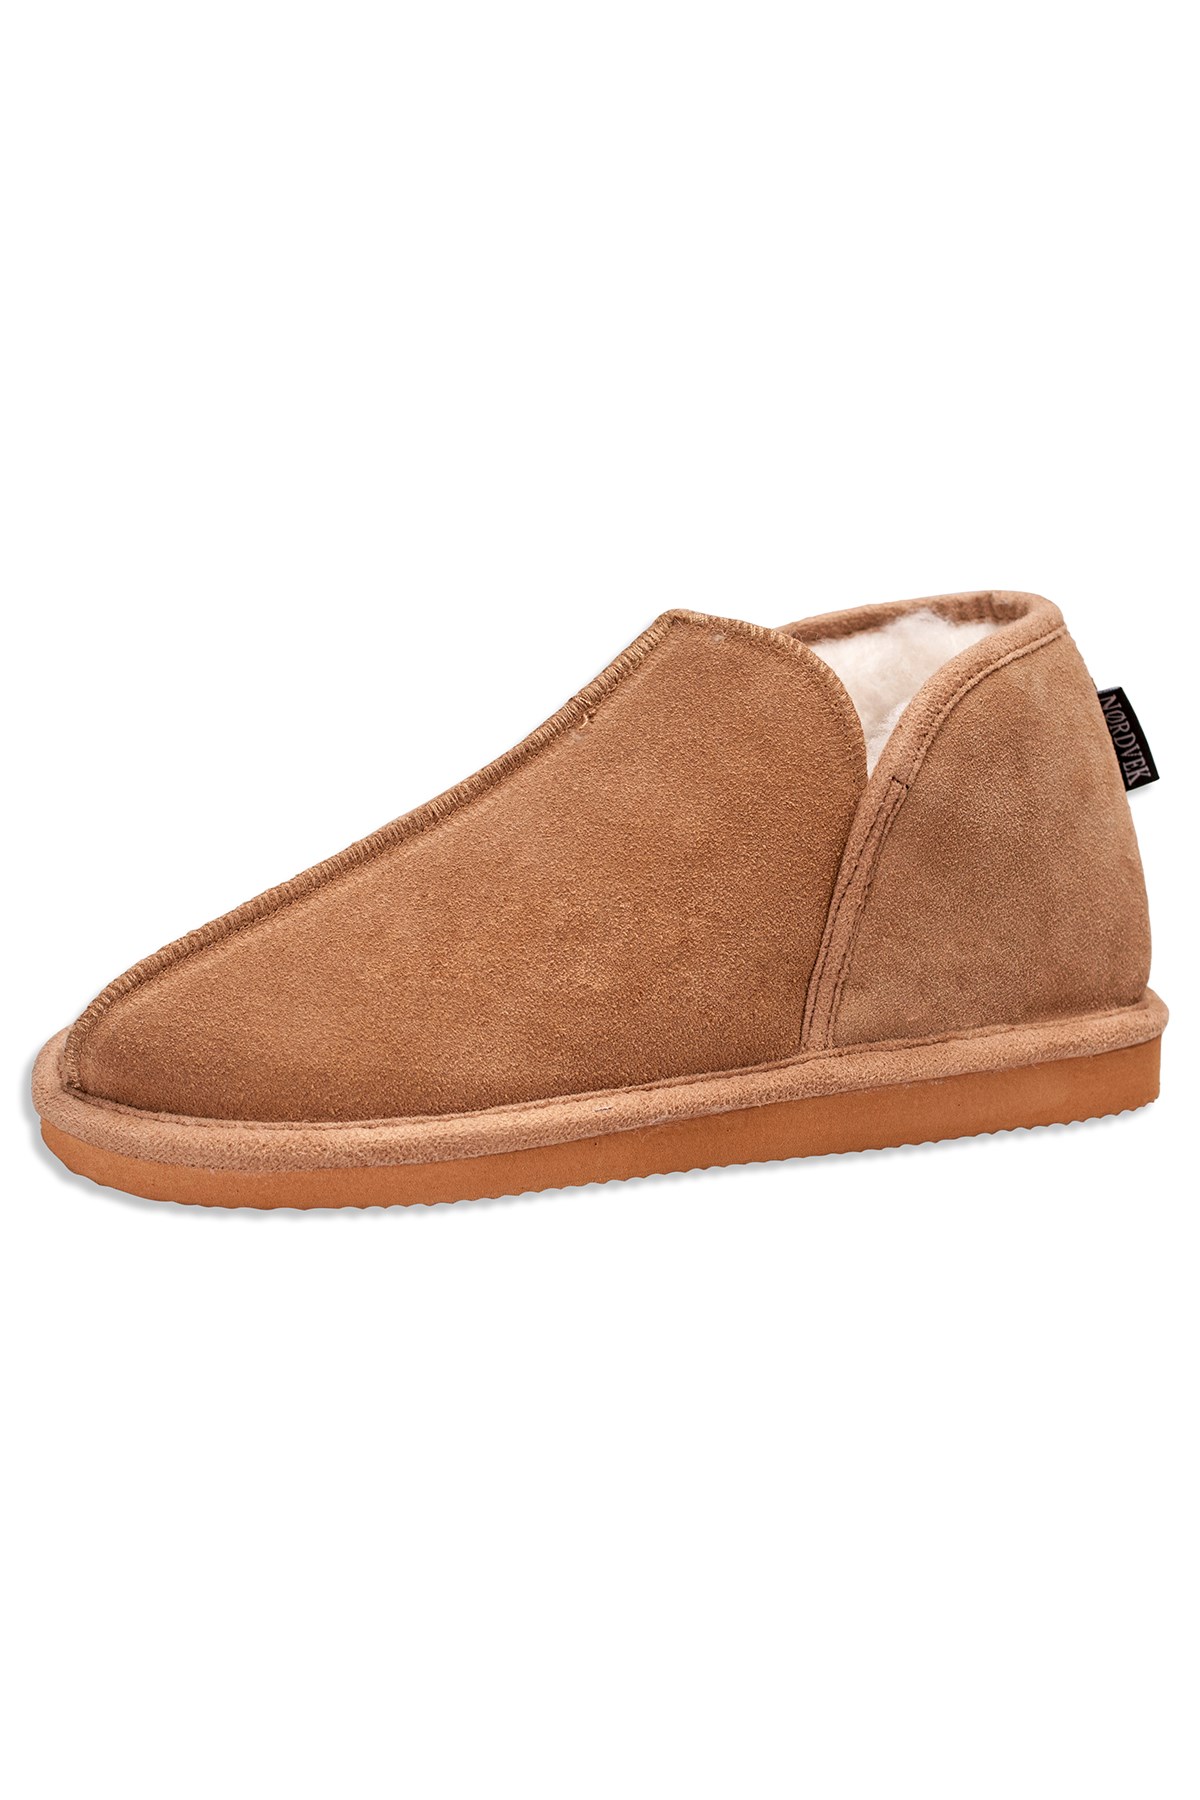 ➤➤ Mens Slipper Boots | Free Express Shipping (US)